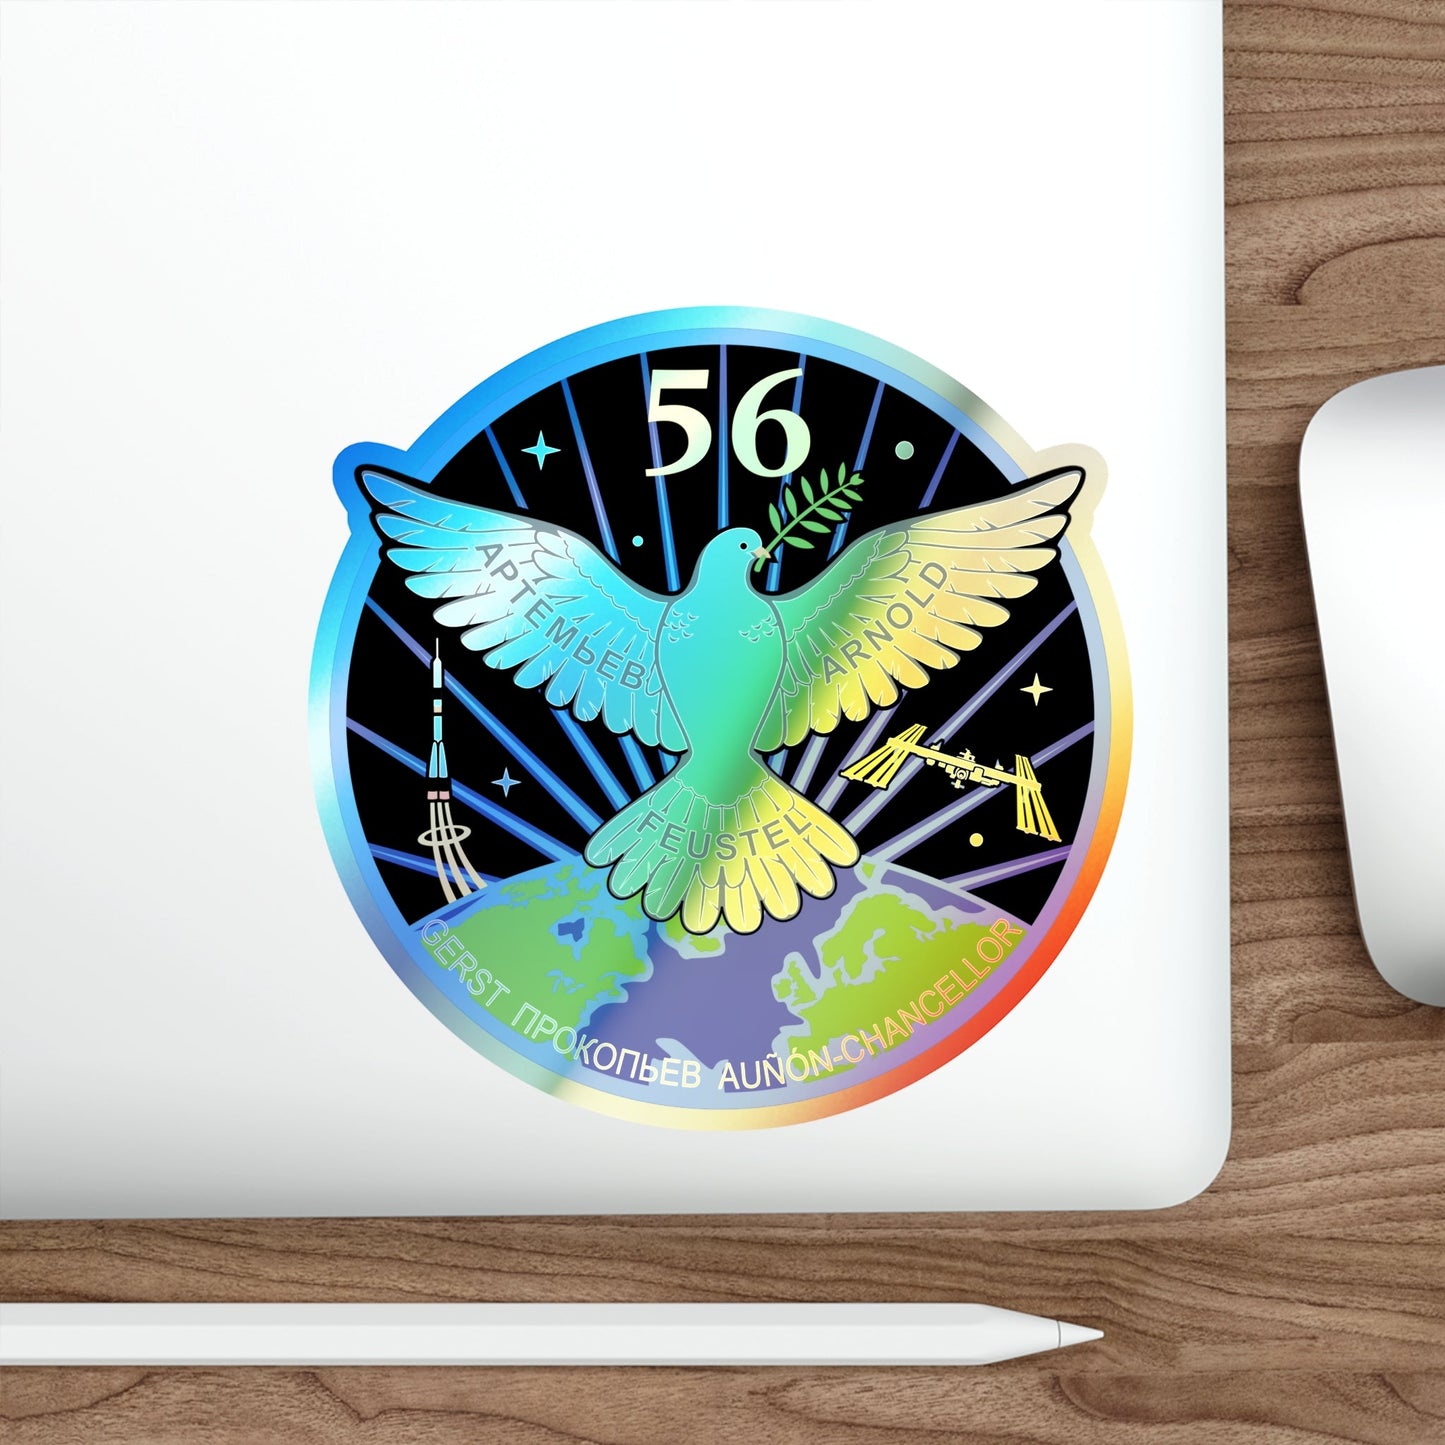 ISS Expedition 56 (NASA) Holographic STICKER Die-Cut Vinyl Decal-The Sticker Space